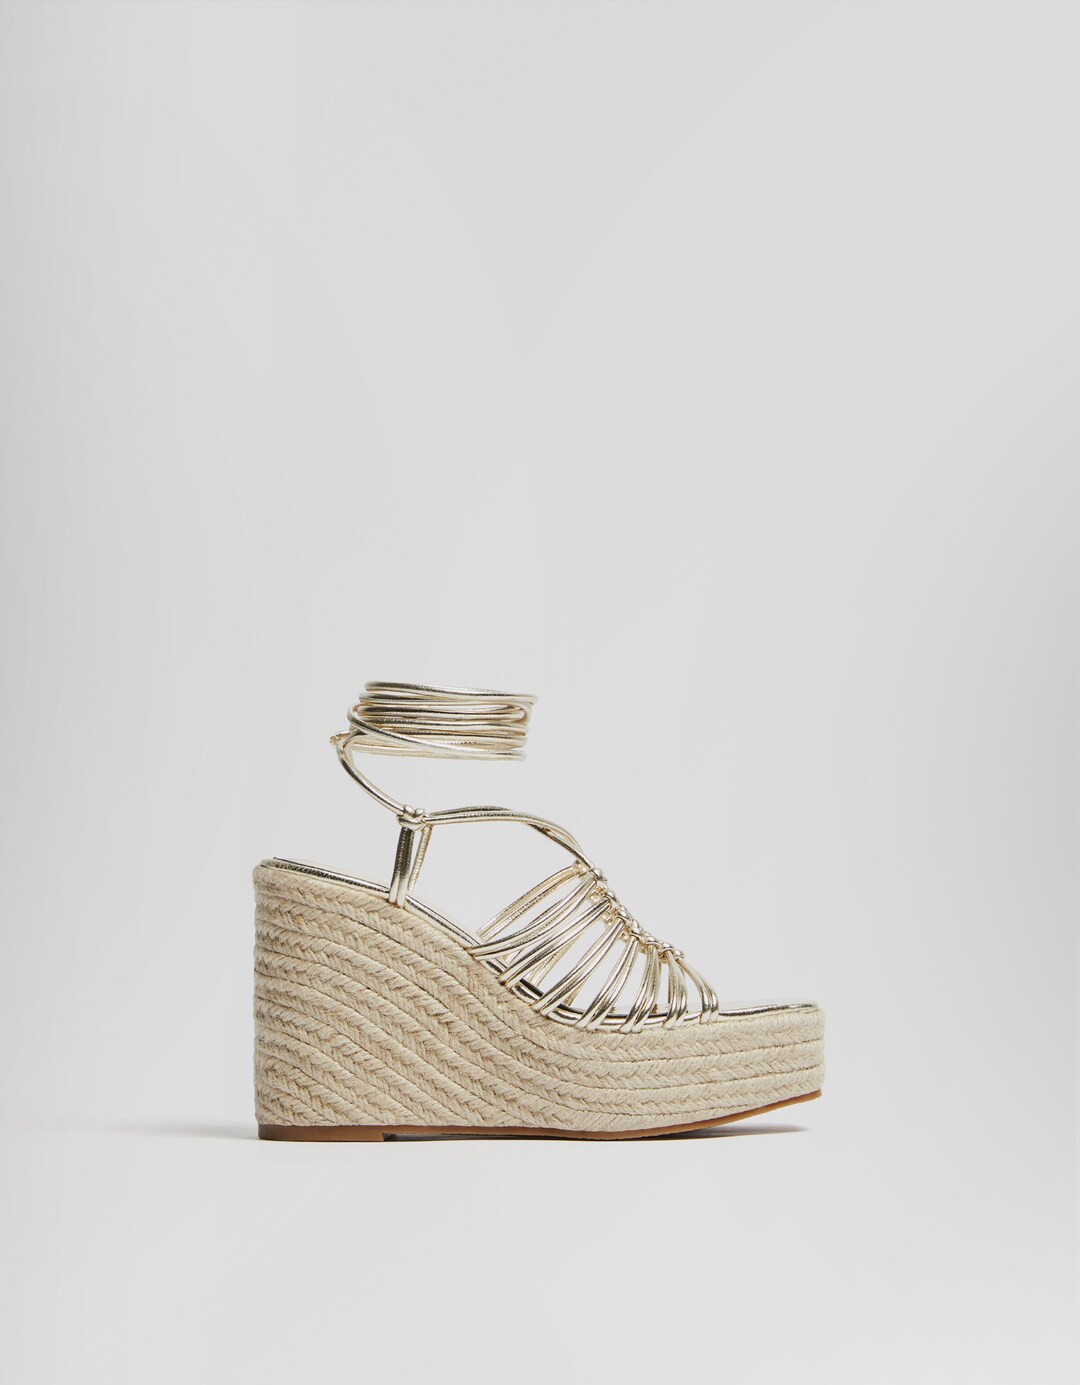 Lace up strappy wedge espadrilles